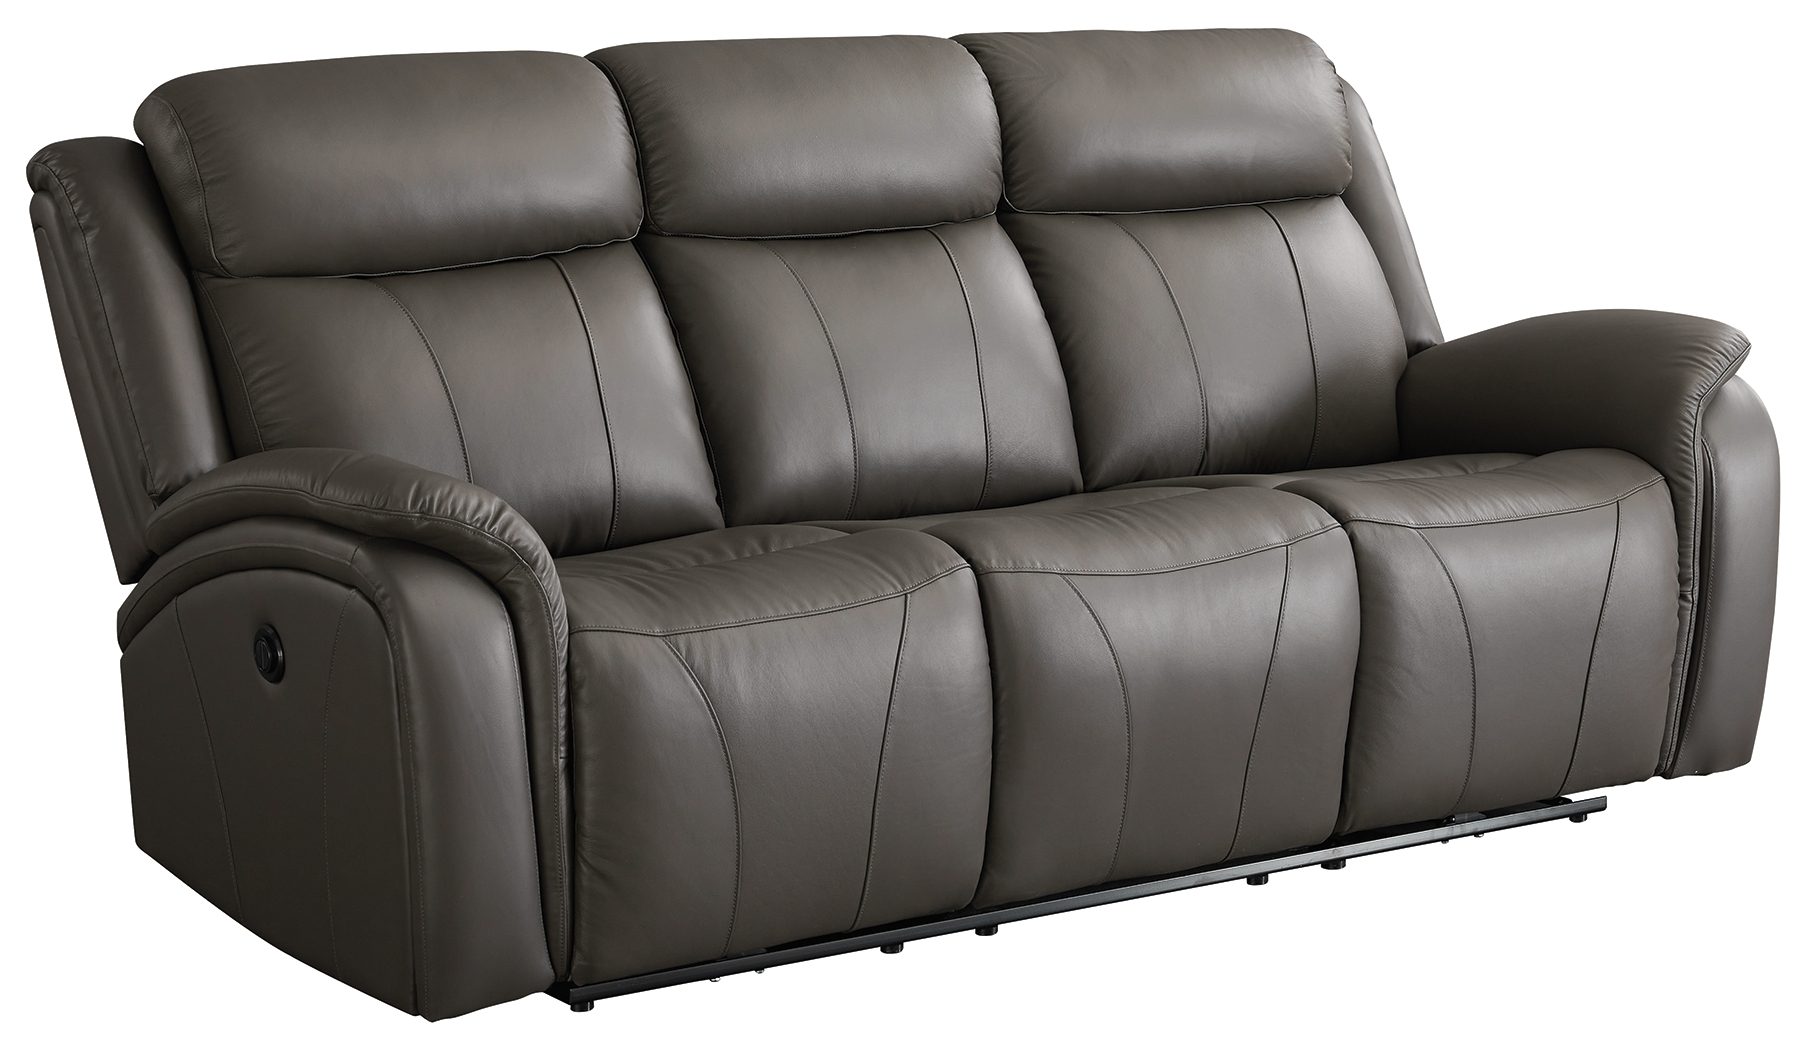 latimer brown faux leather power reclining sofa